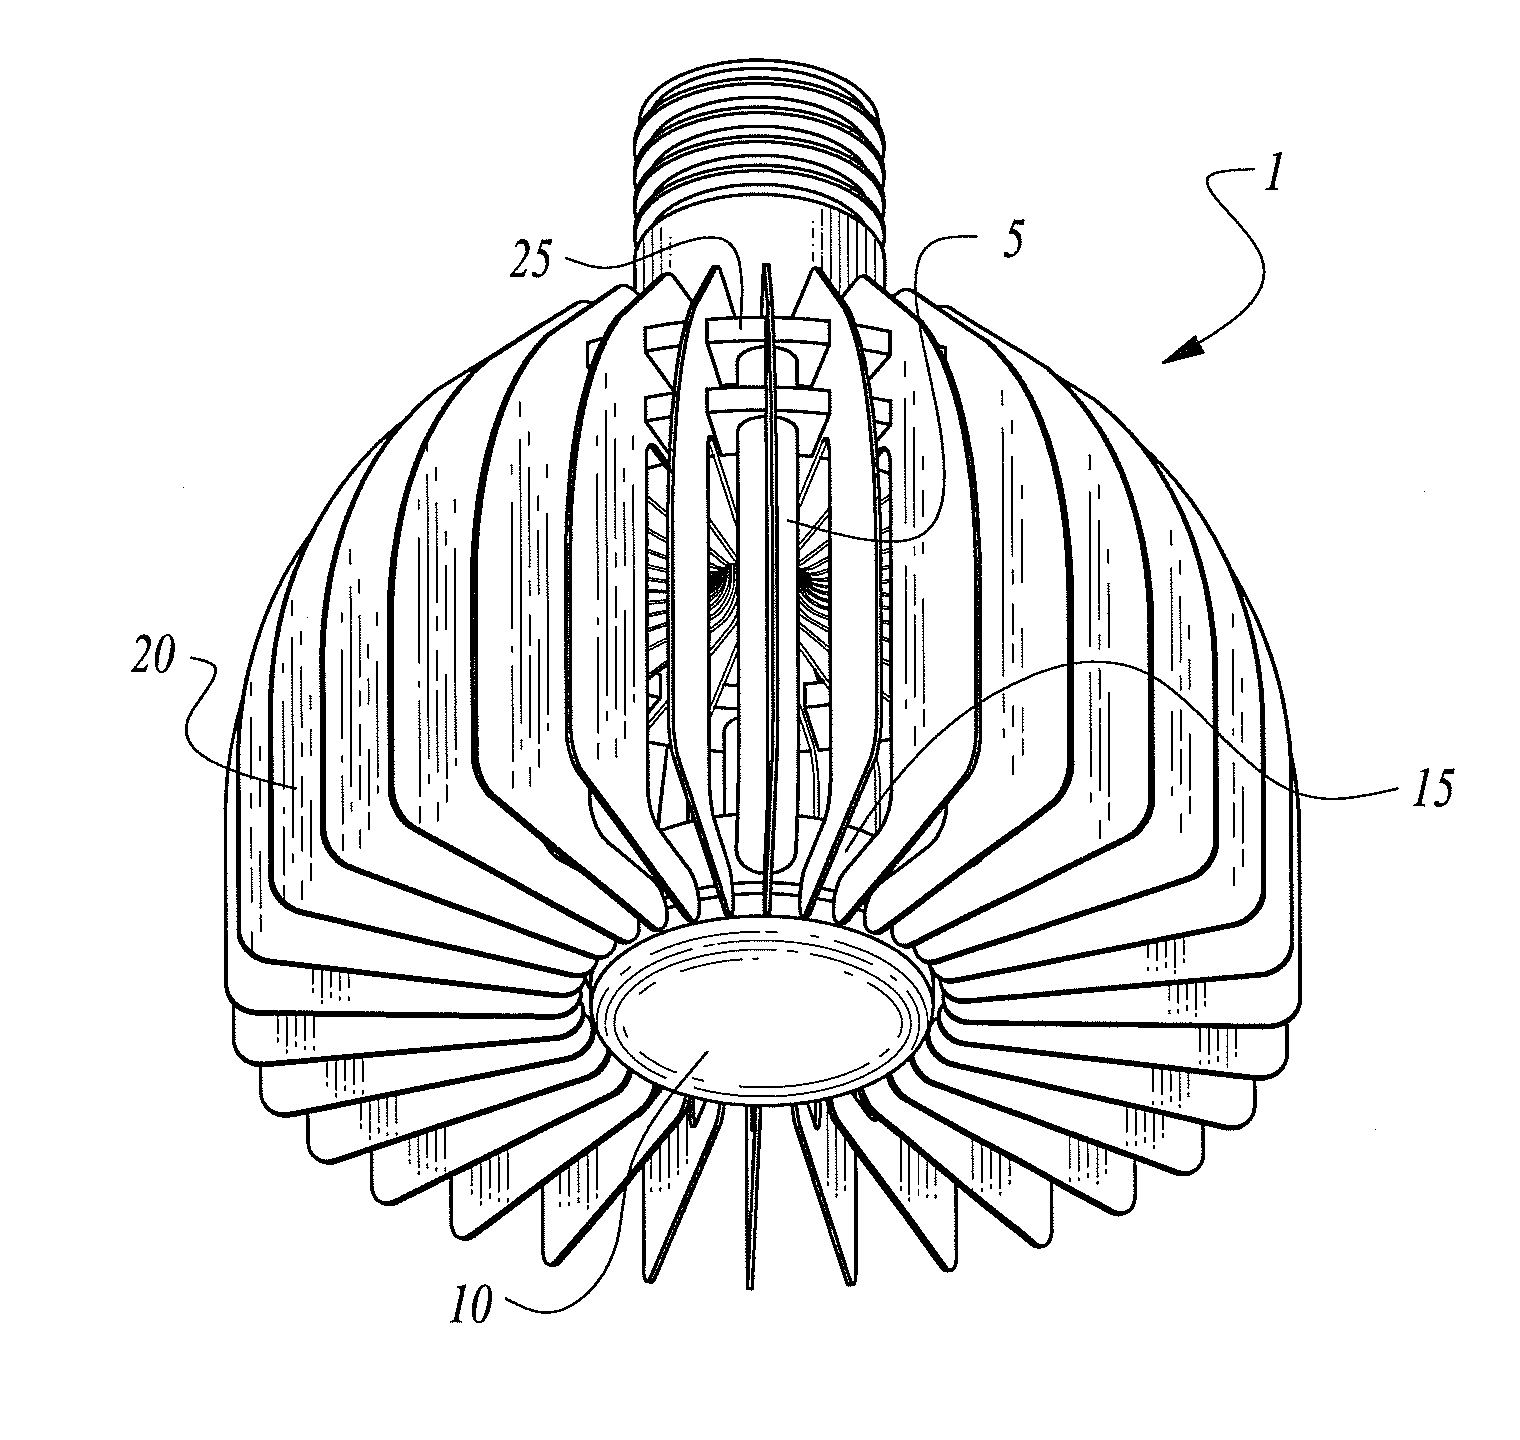 Thermally-Managed Electronic Device